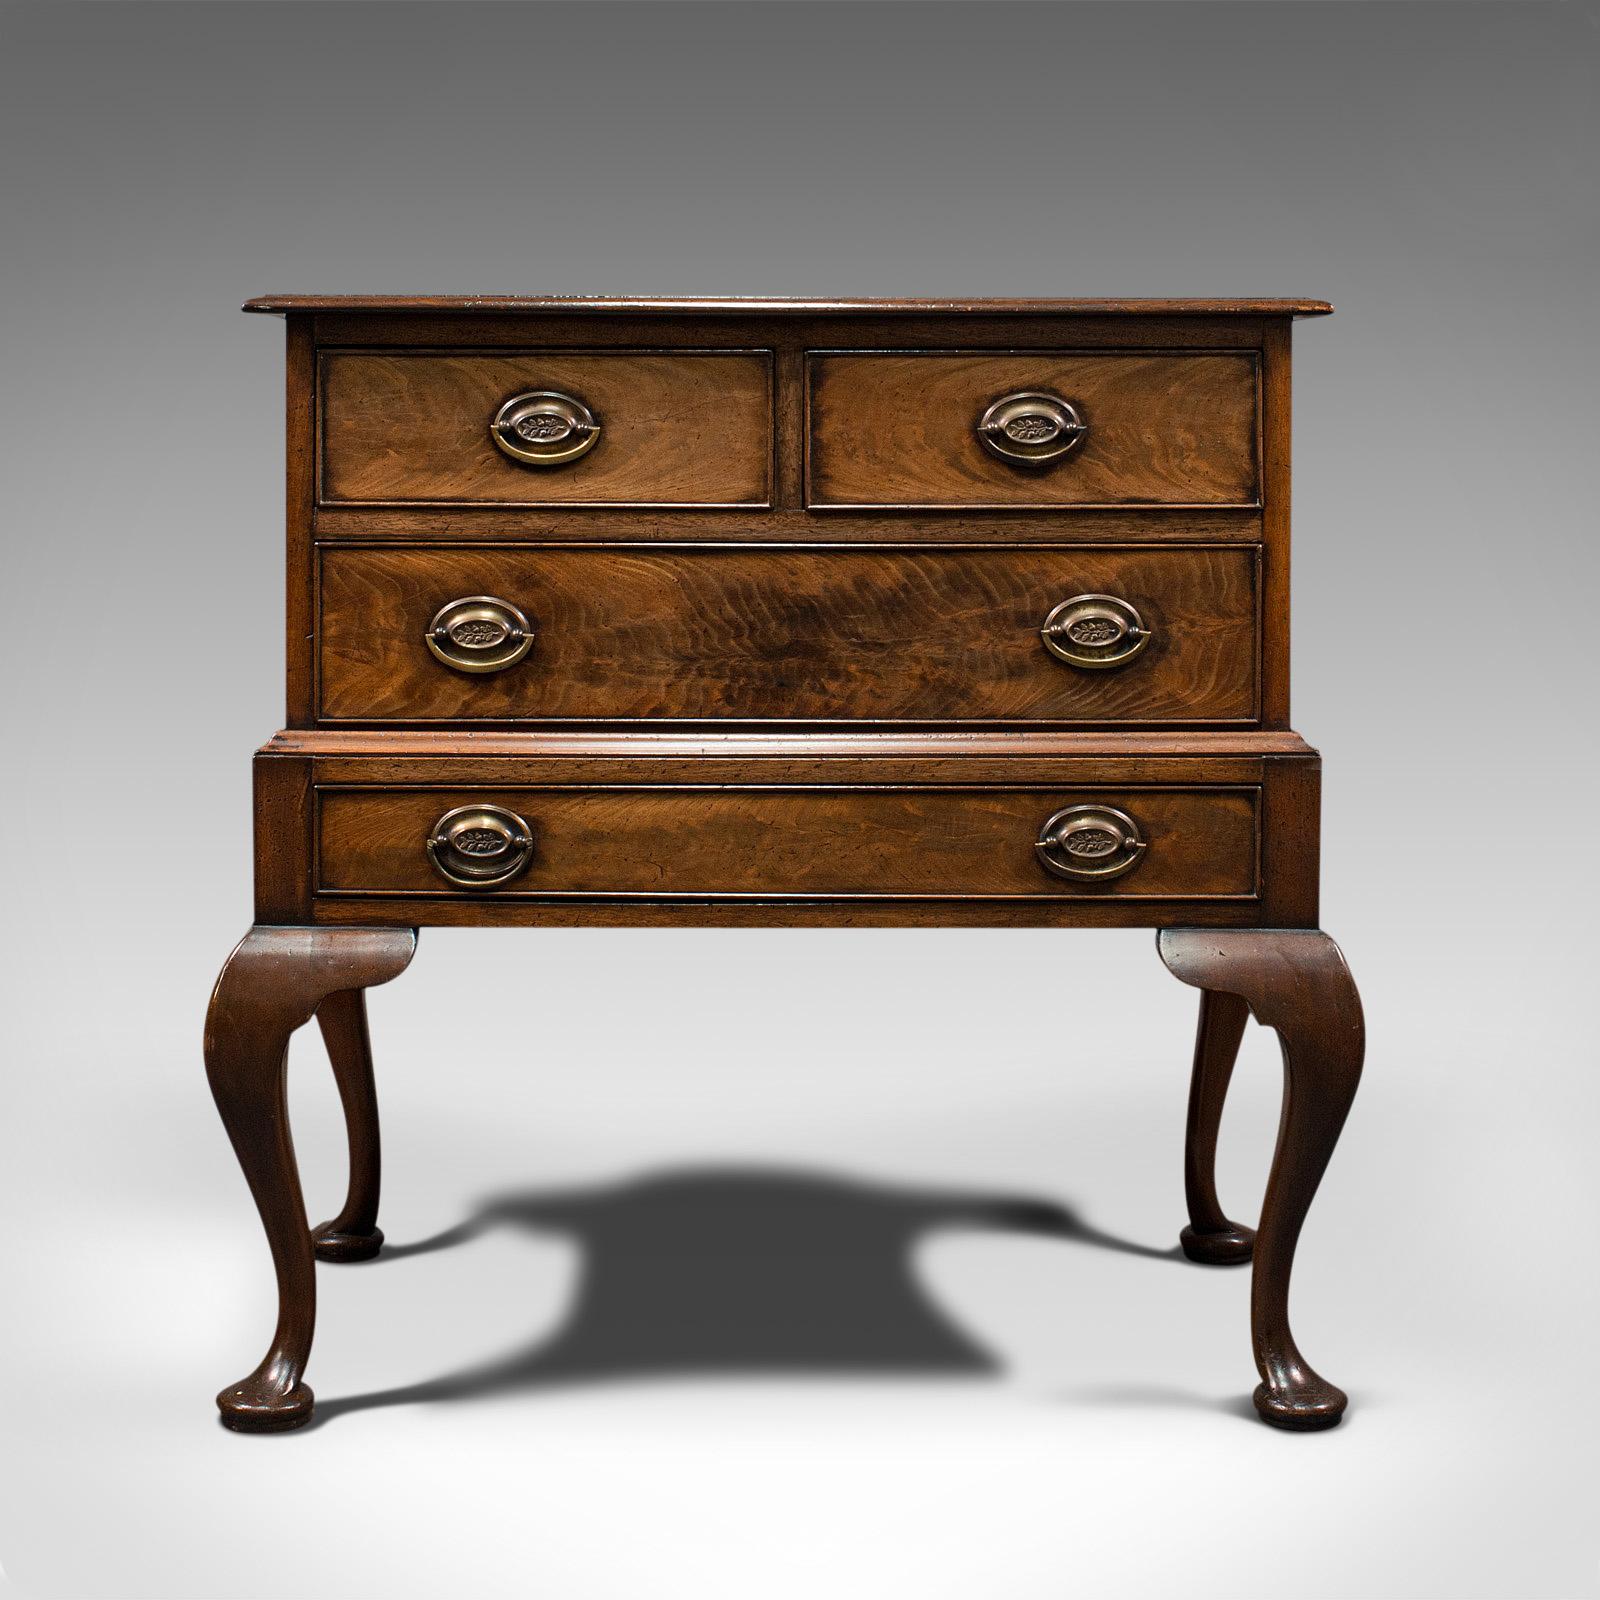 This is an antique dwarf chest on stand. An English, flame mahogany chest of drawers, dating to the late Victorian period, circa 1900.

Elegant raised chest of drawers with superb figuring
Displaying a desirable aged patina and in good